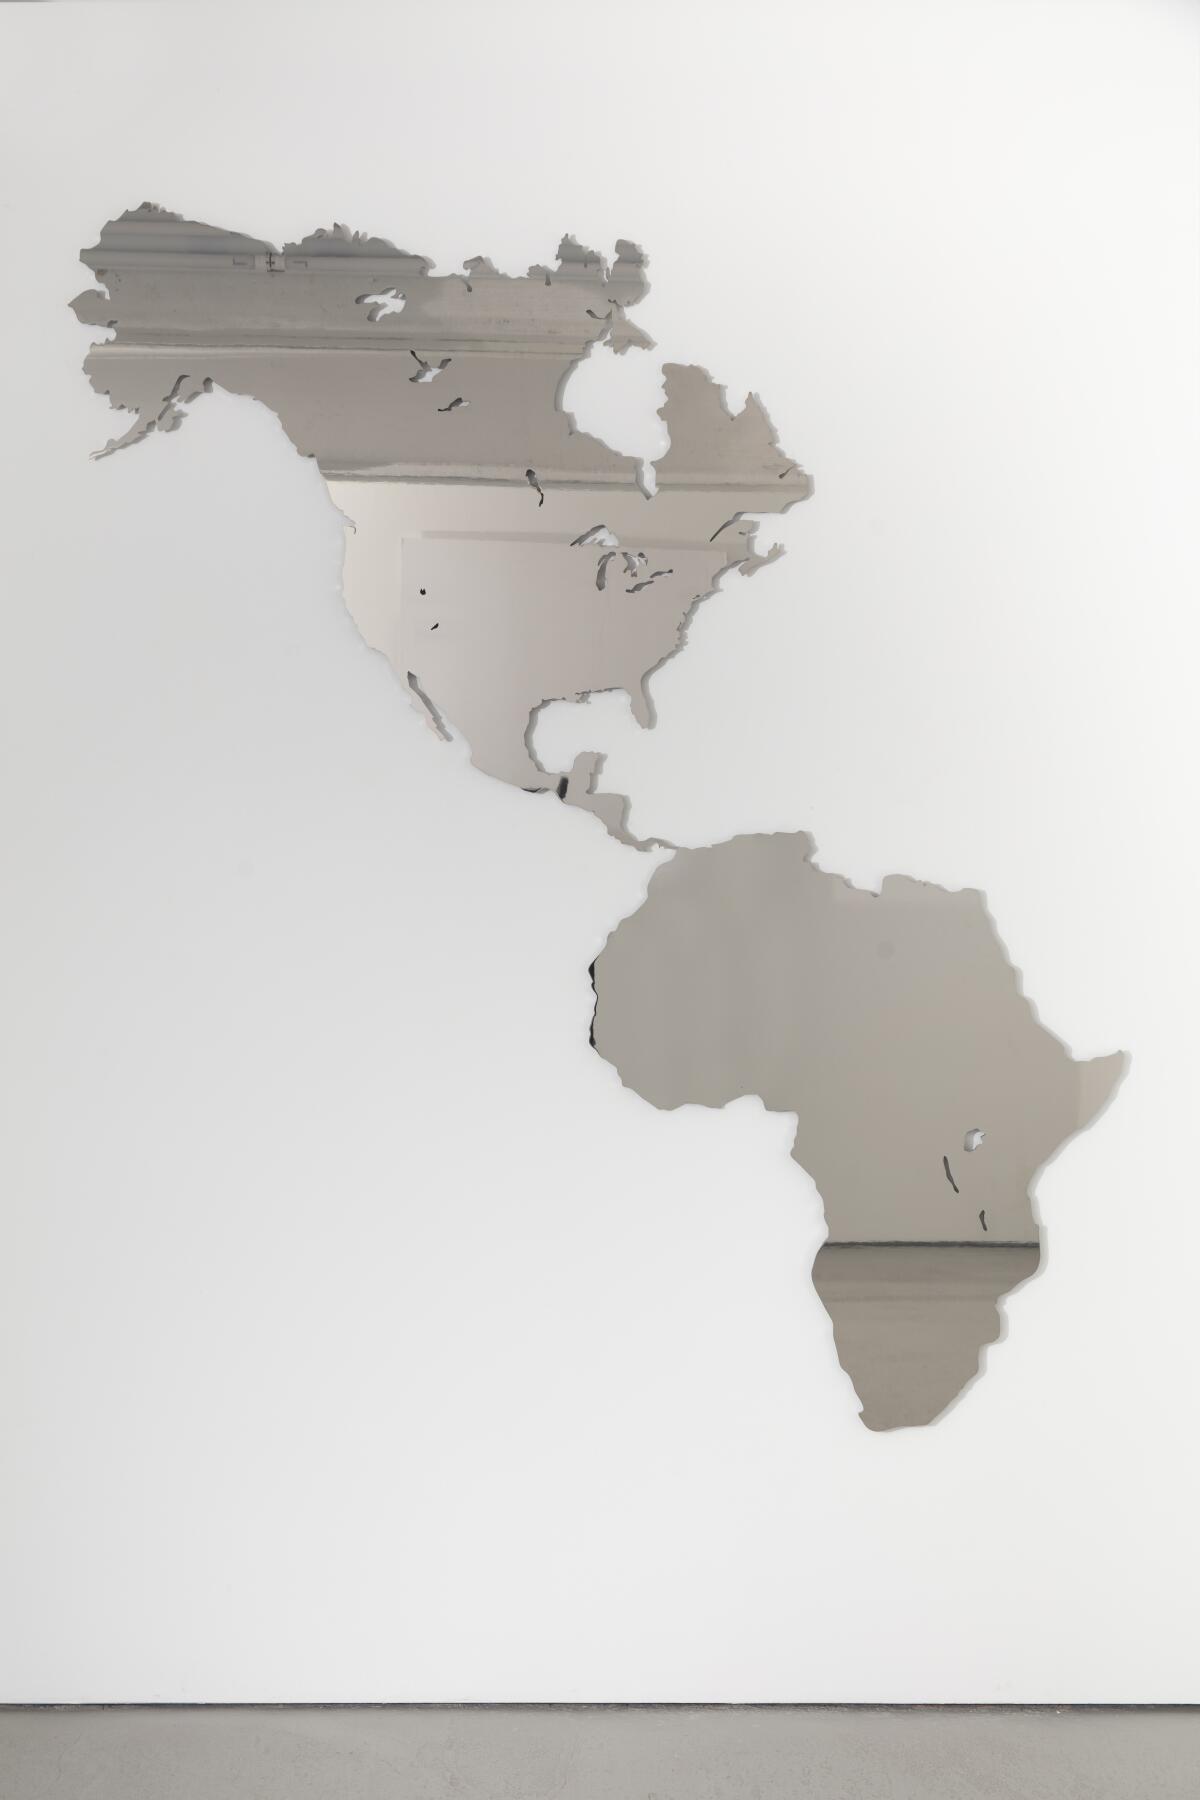 A mirror shaped like the Americas and Africa